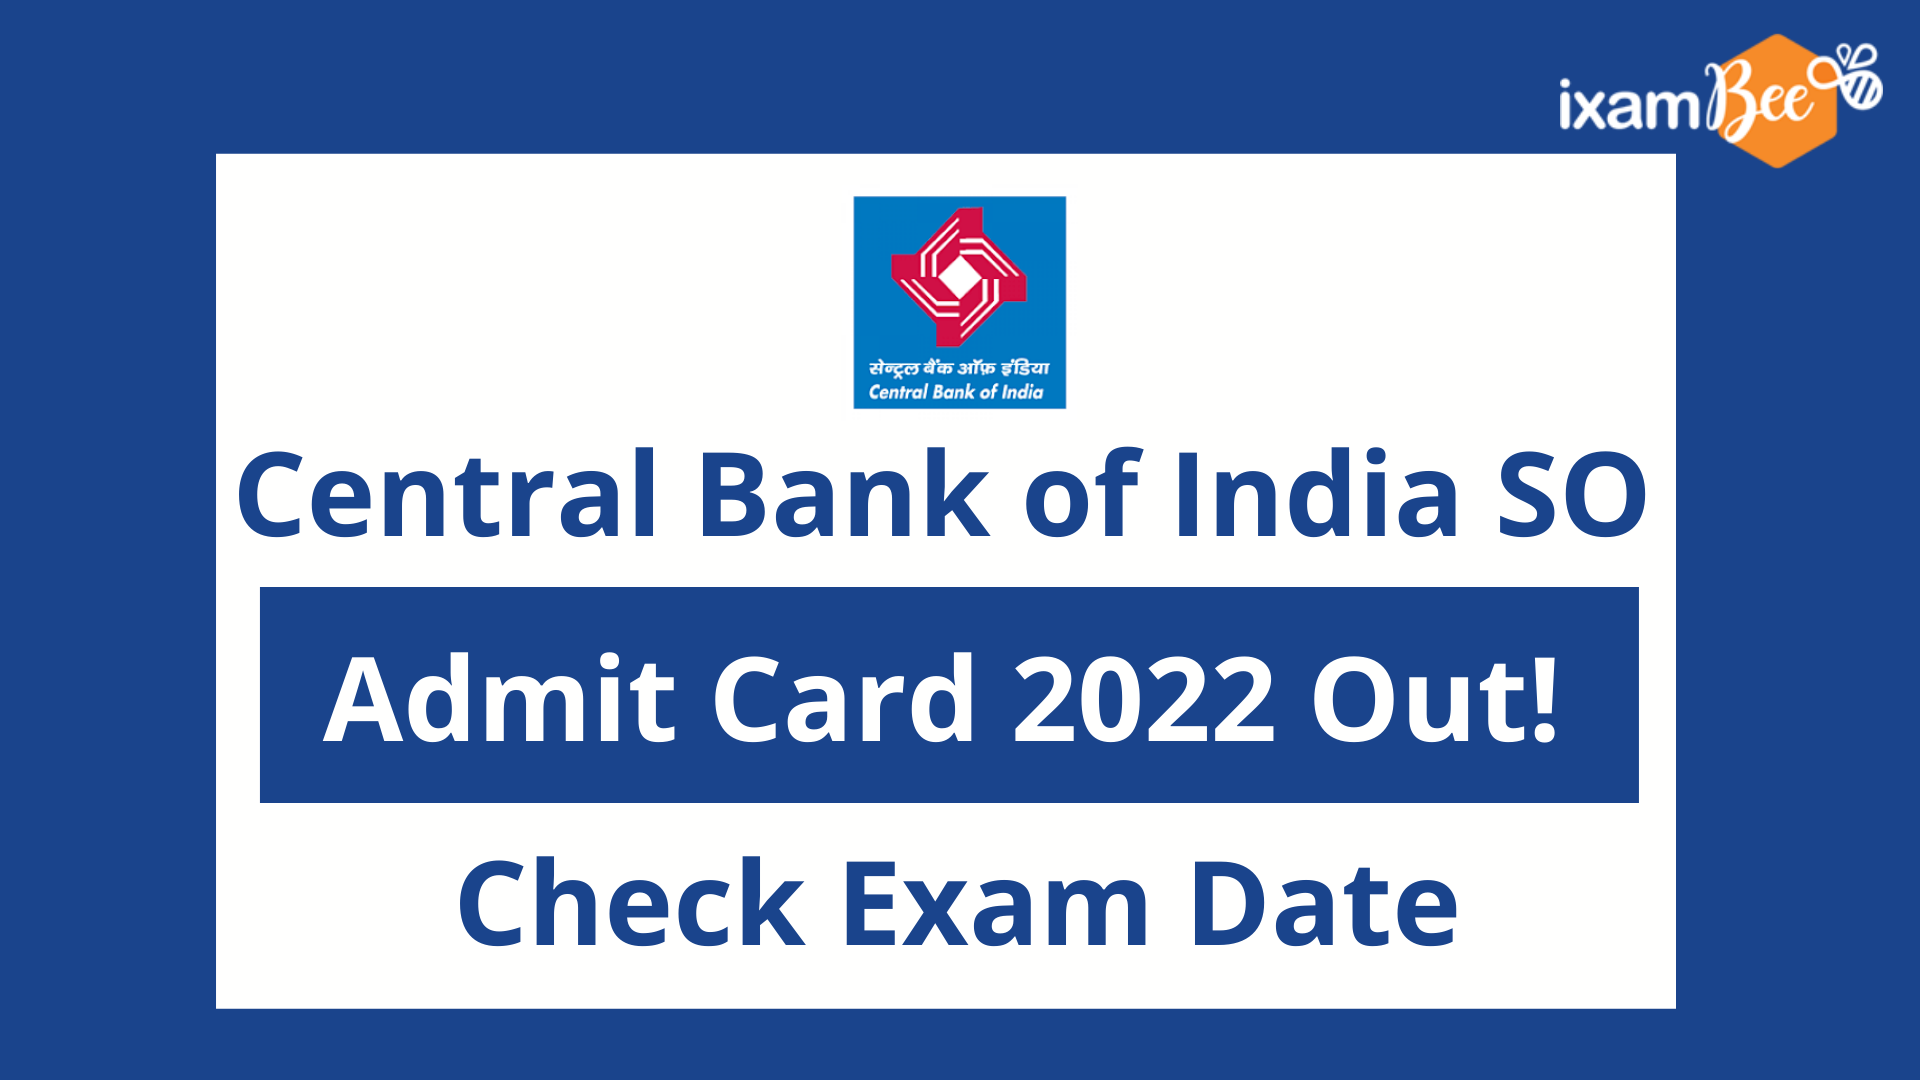 Central Bank of India SO Admit Card 2022 Out